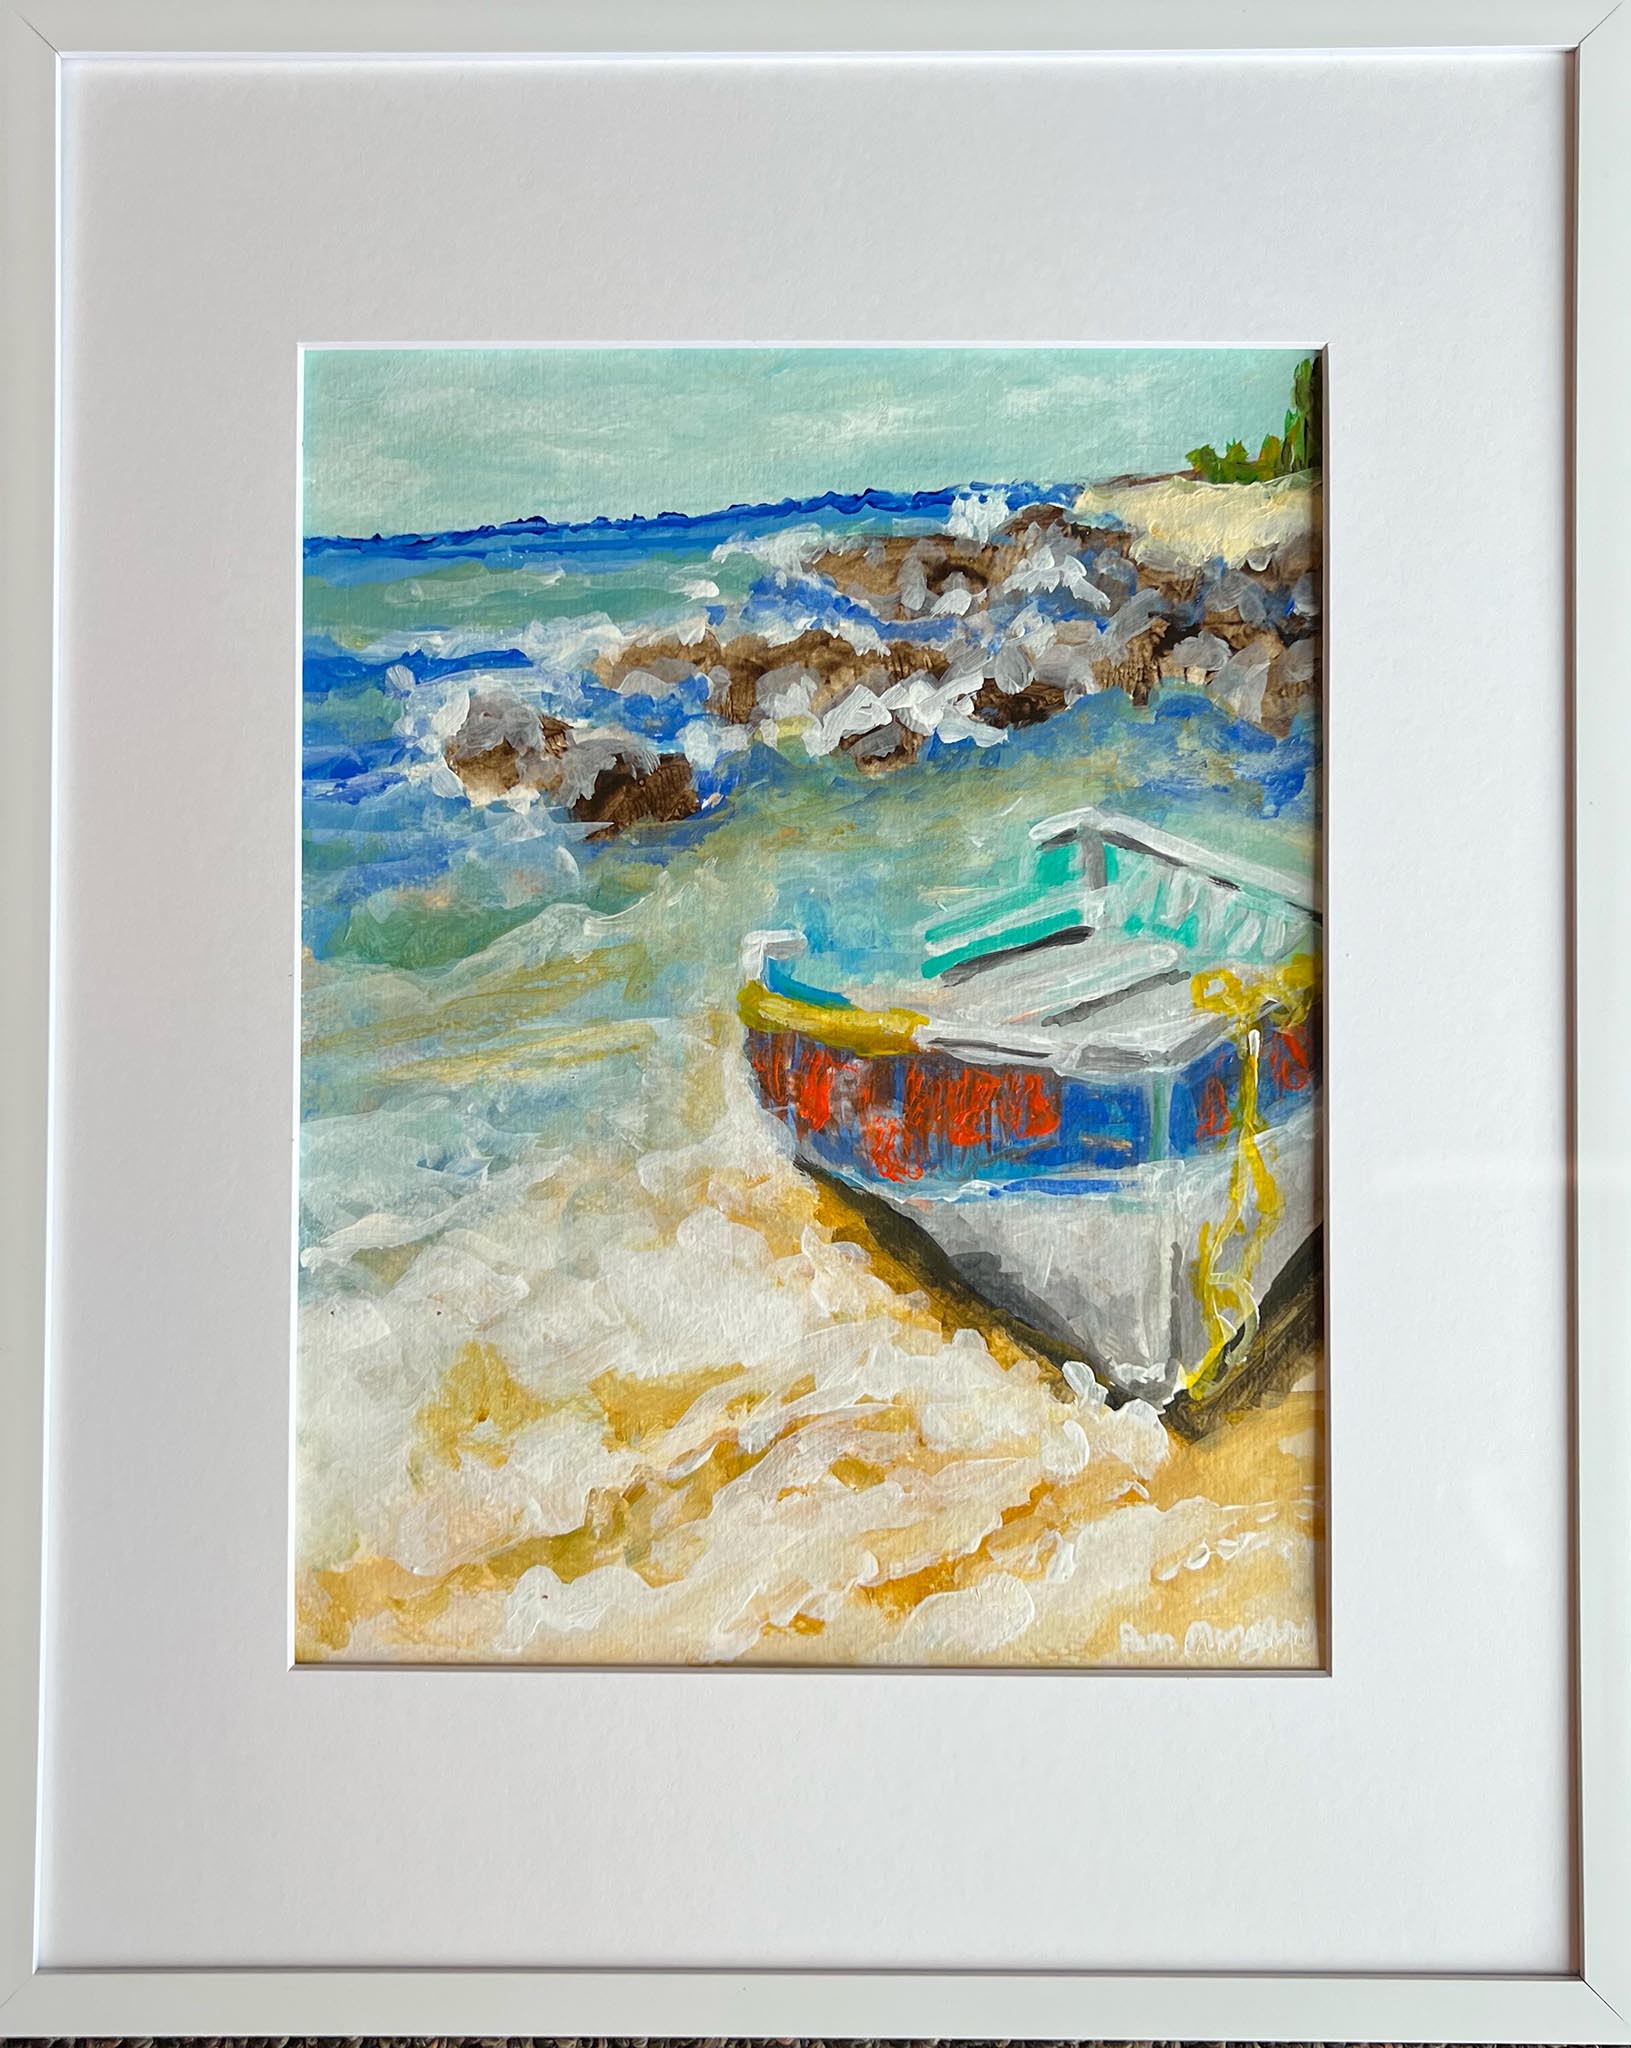 acrylic landscape painting of a boat that washed ashore on a beach